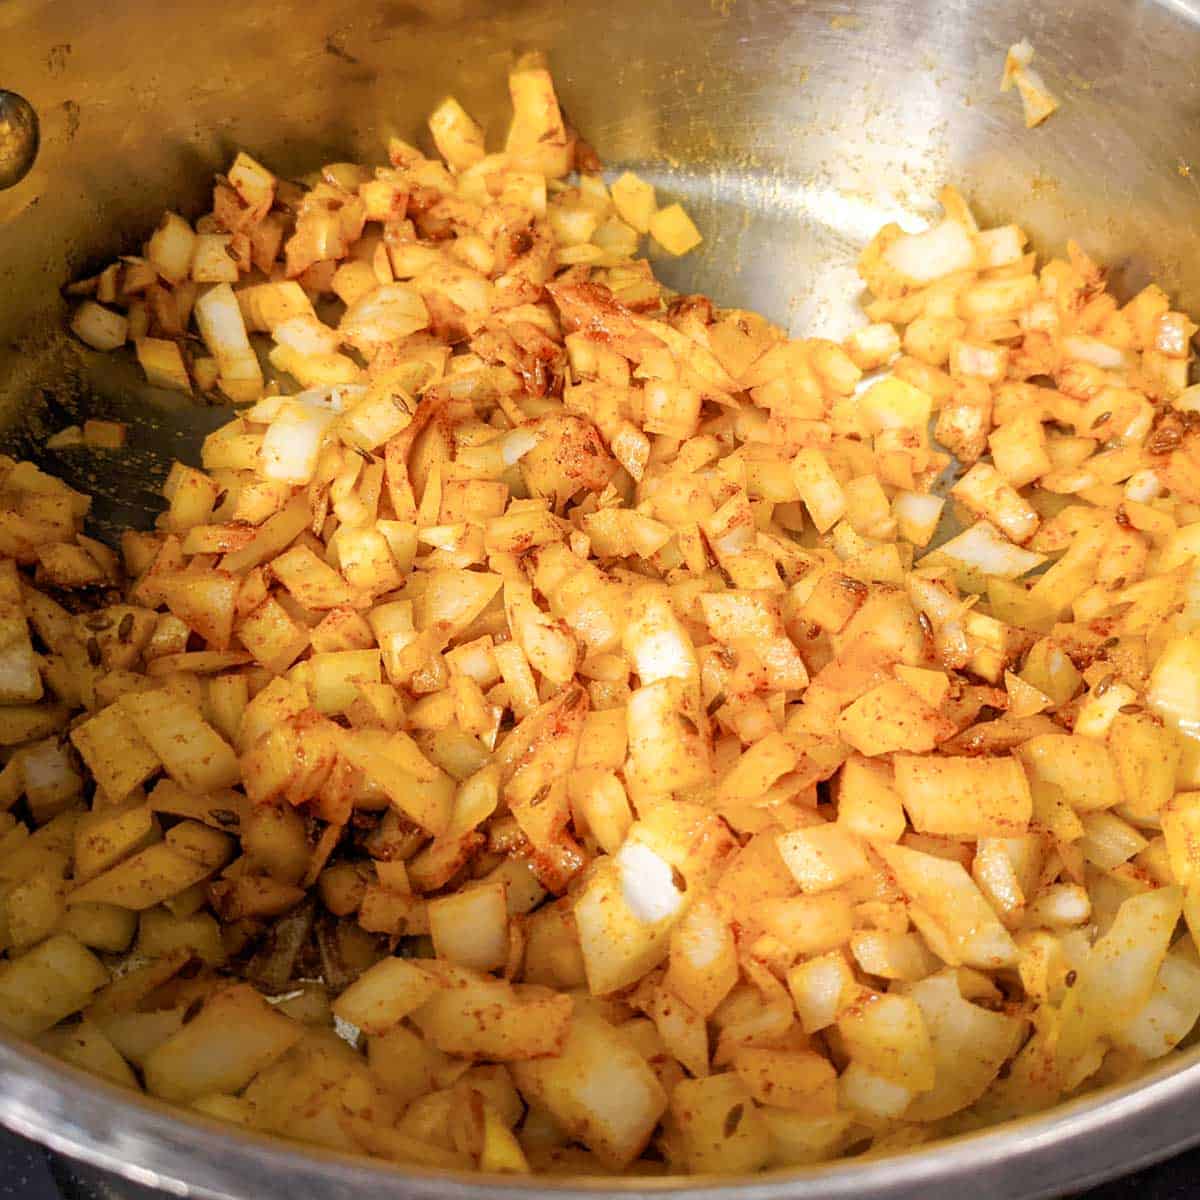 Overhead photo of a pan with chopped onions and spices